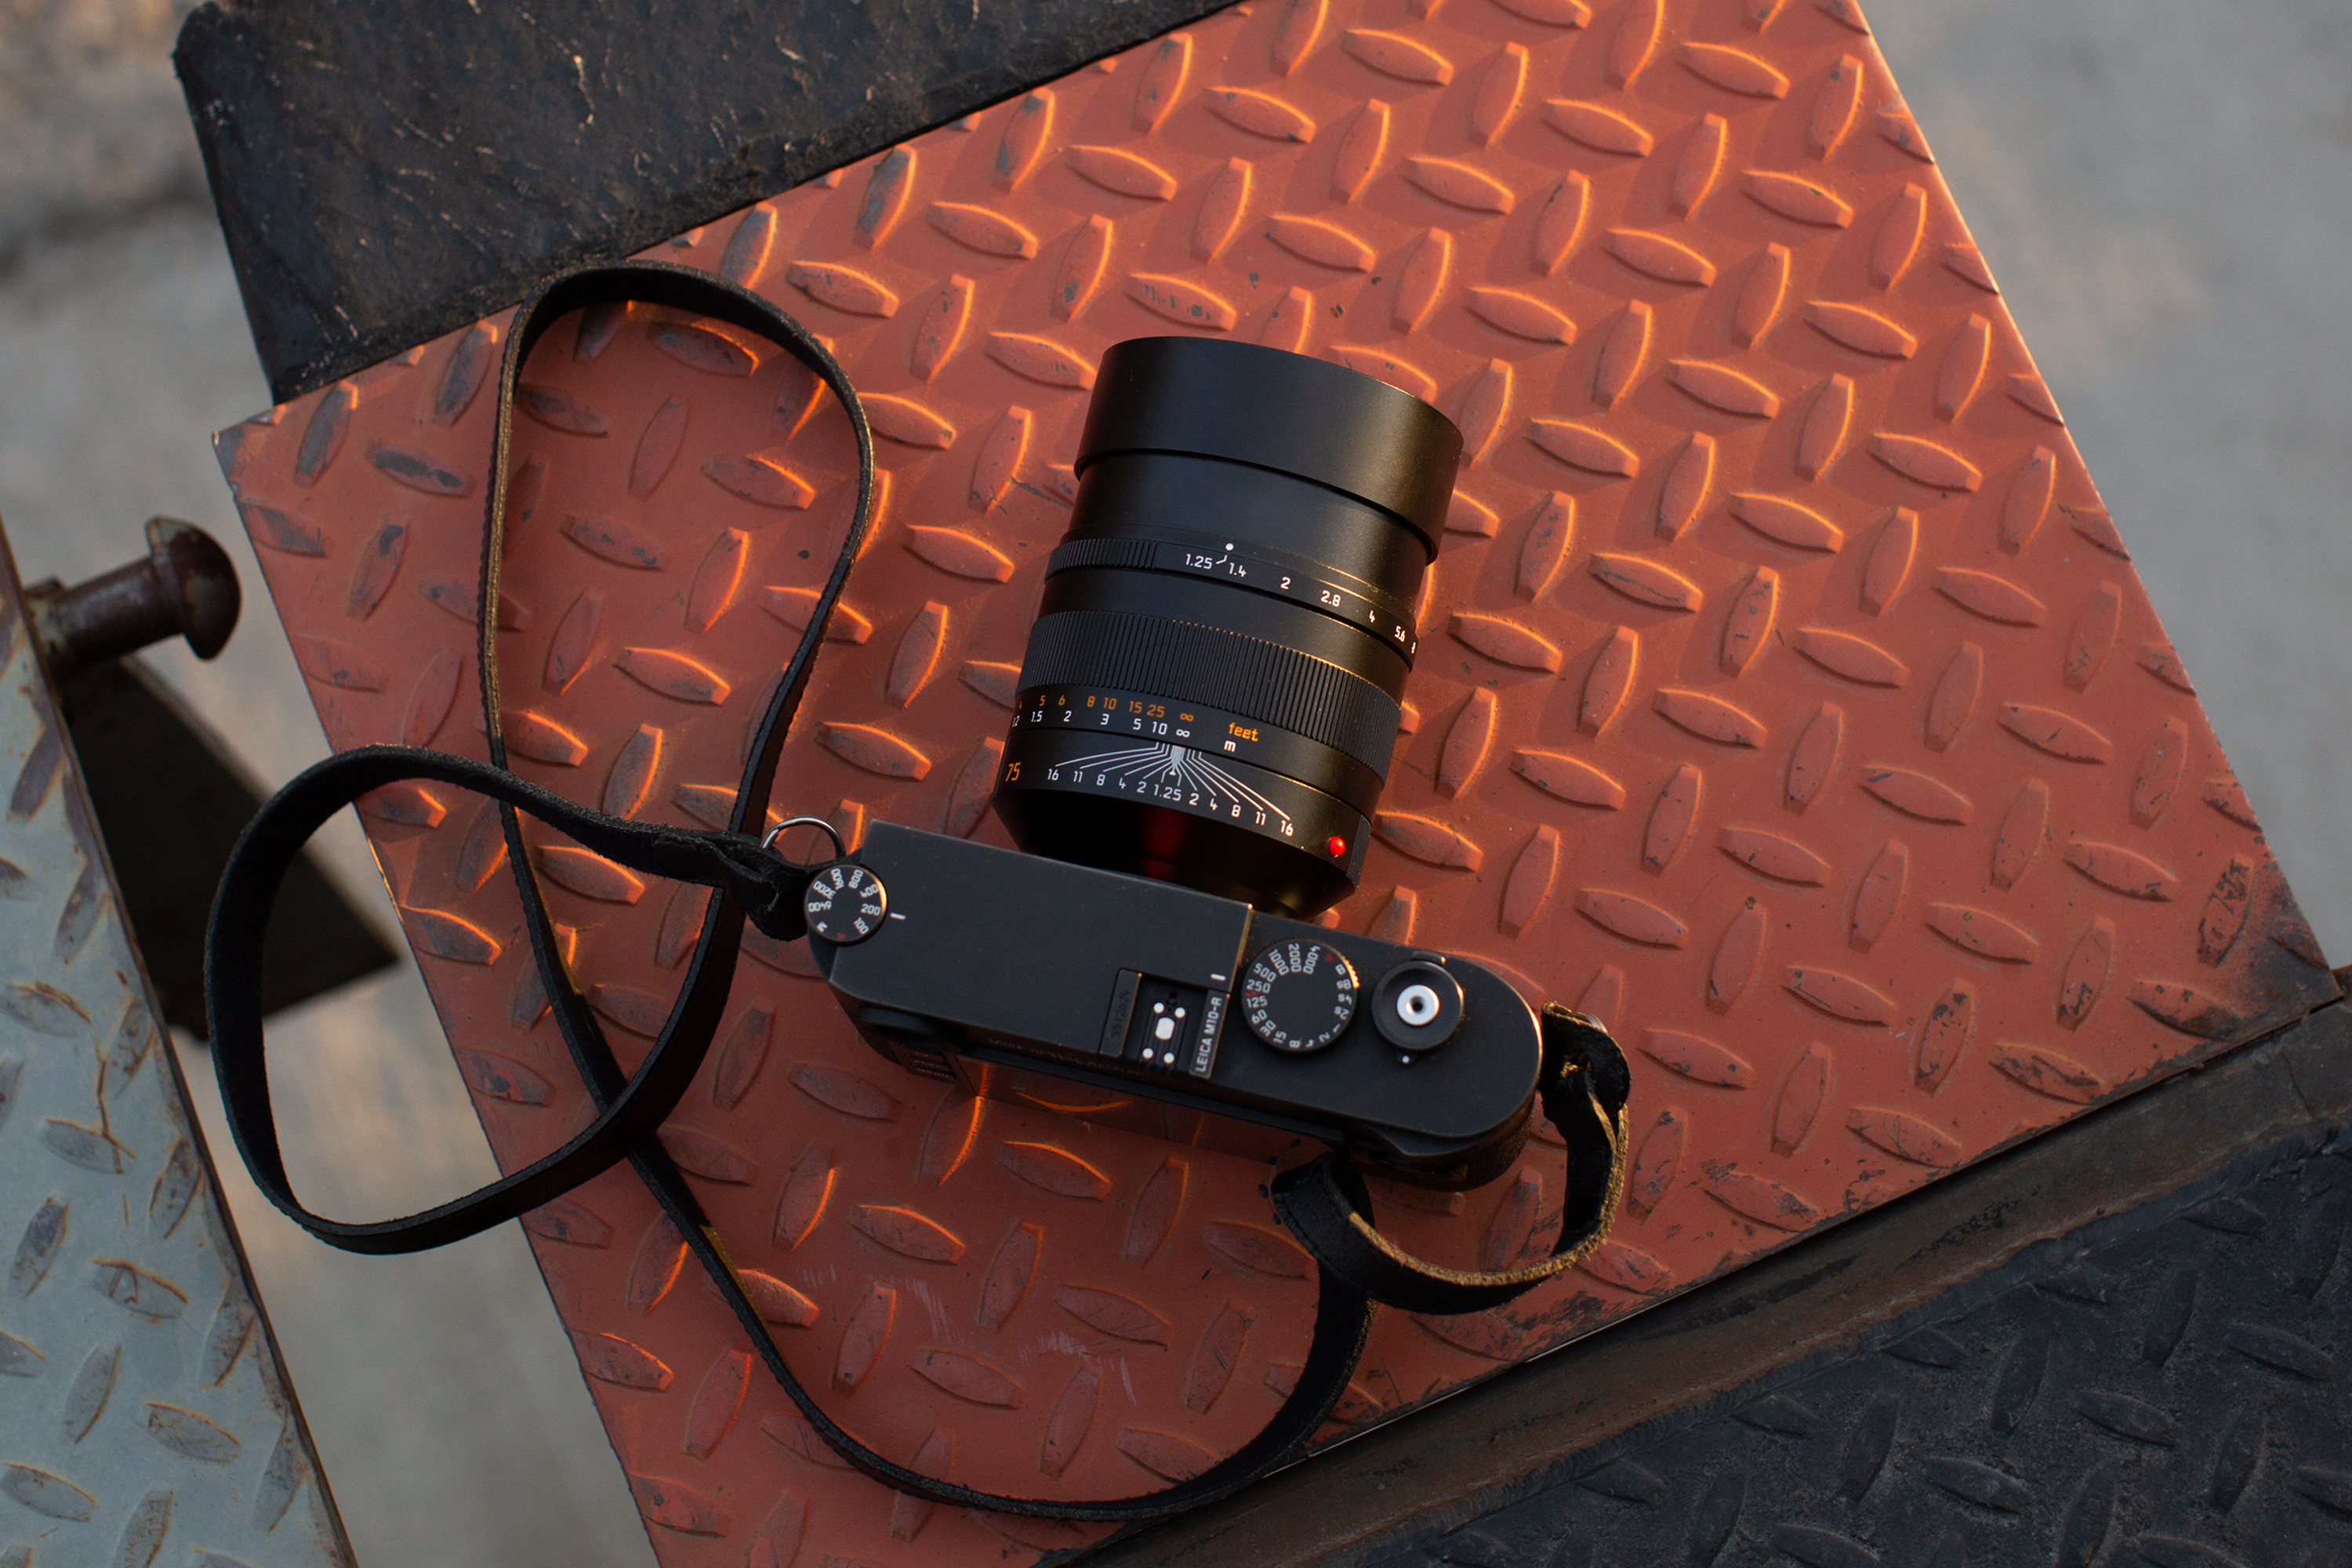 Beautiful Optics. Bokeh for Days. Leica 75mm F1.25 Noctilux Review